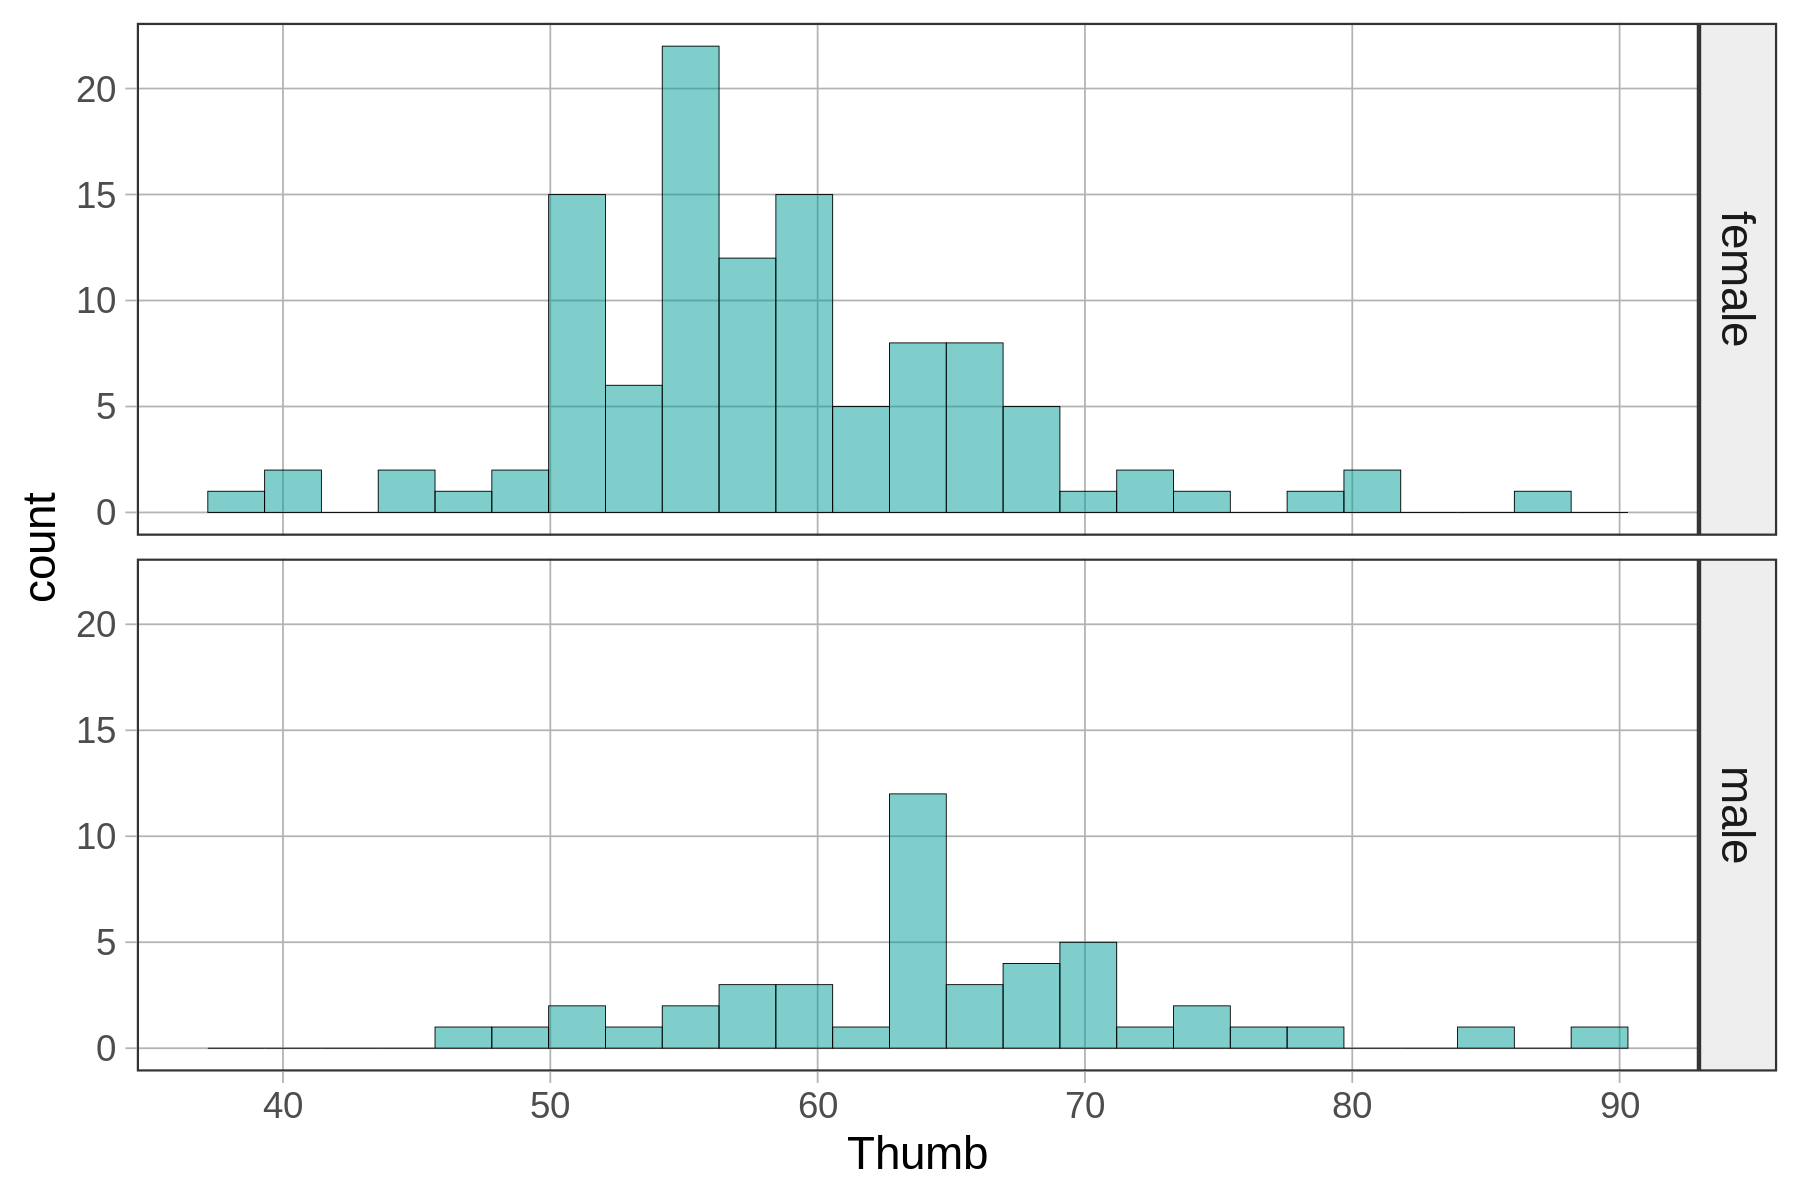 On the left, a faceted histogram of Thumb faceted by Sex (female and male), in teal. The distributions are both roughly normal but the male group is distributed slightly more to the right.